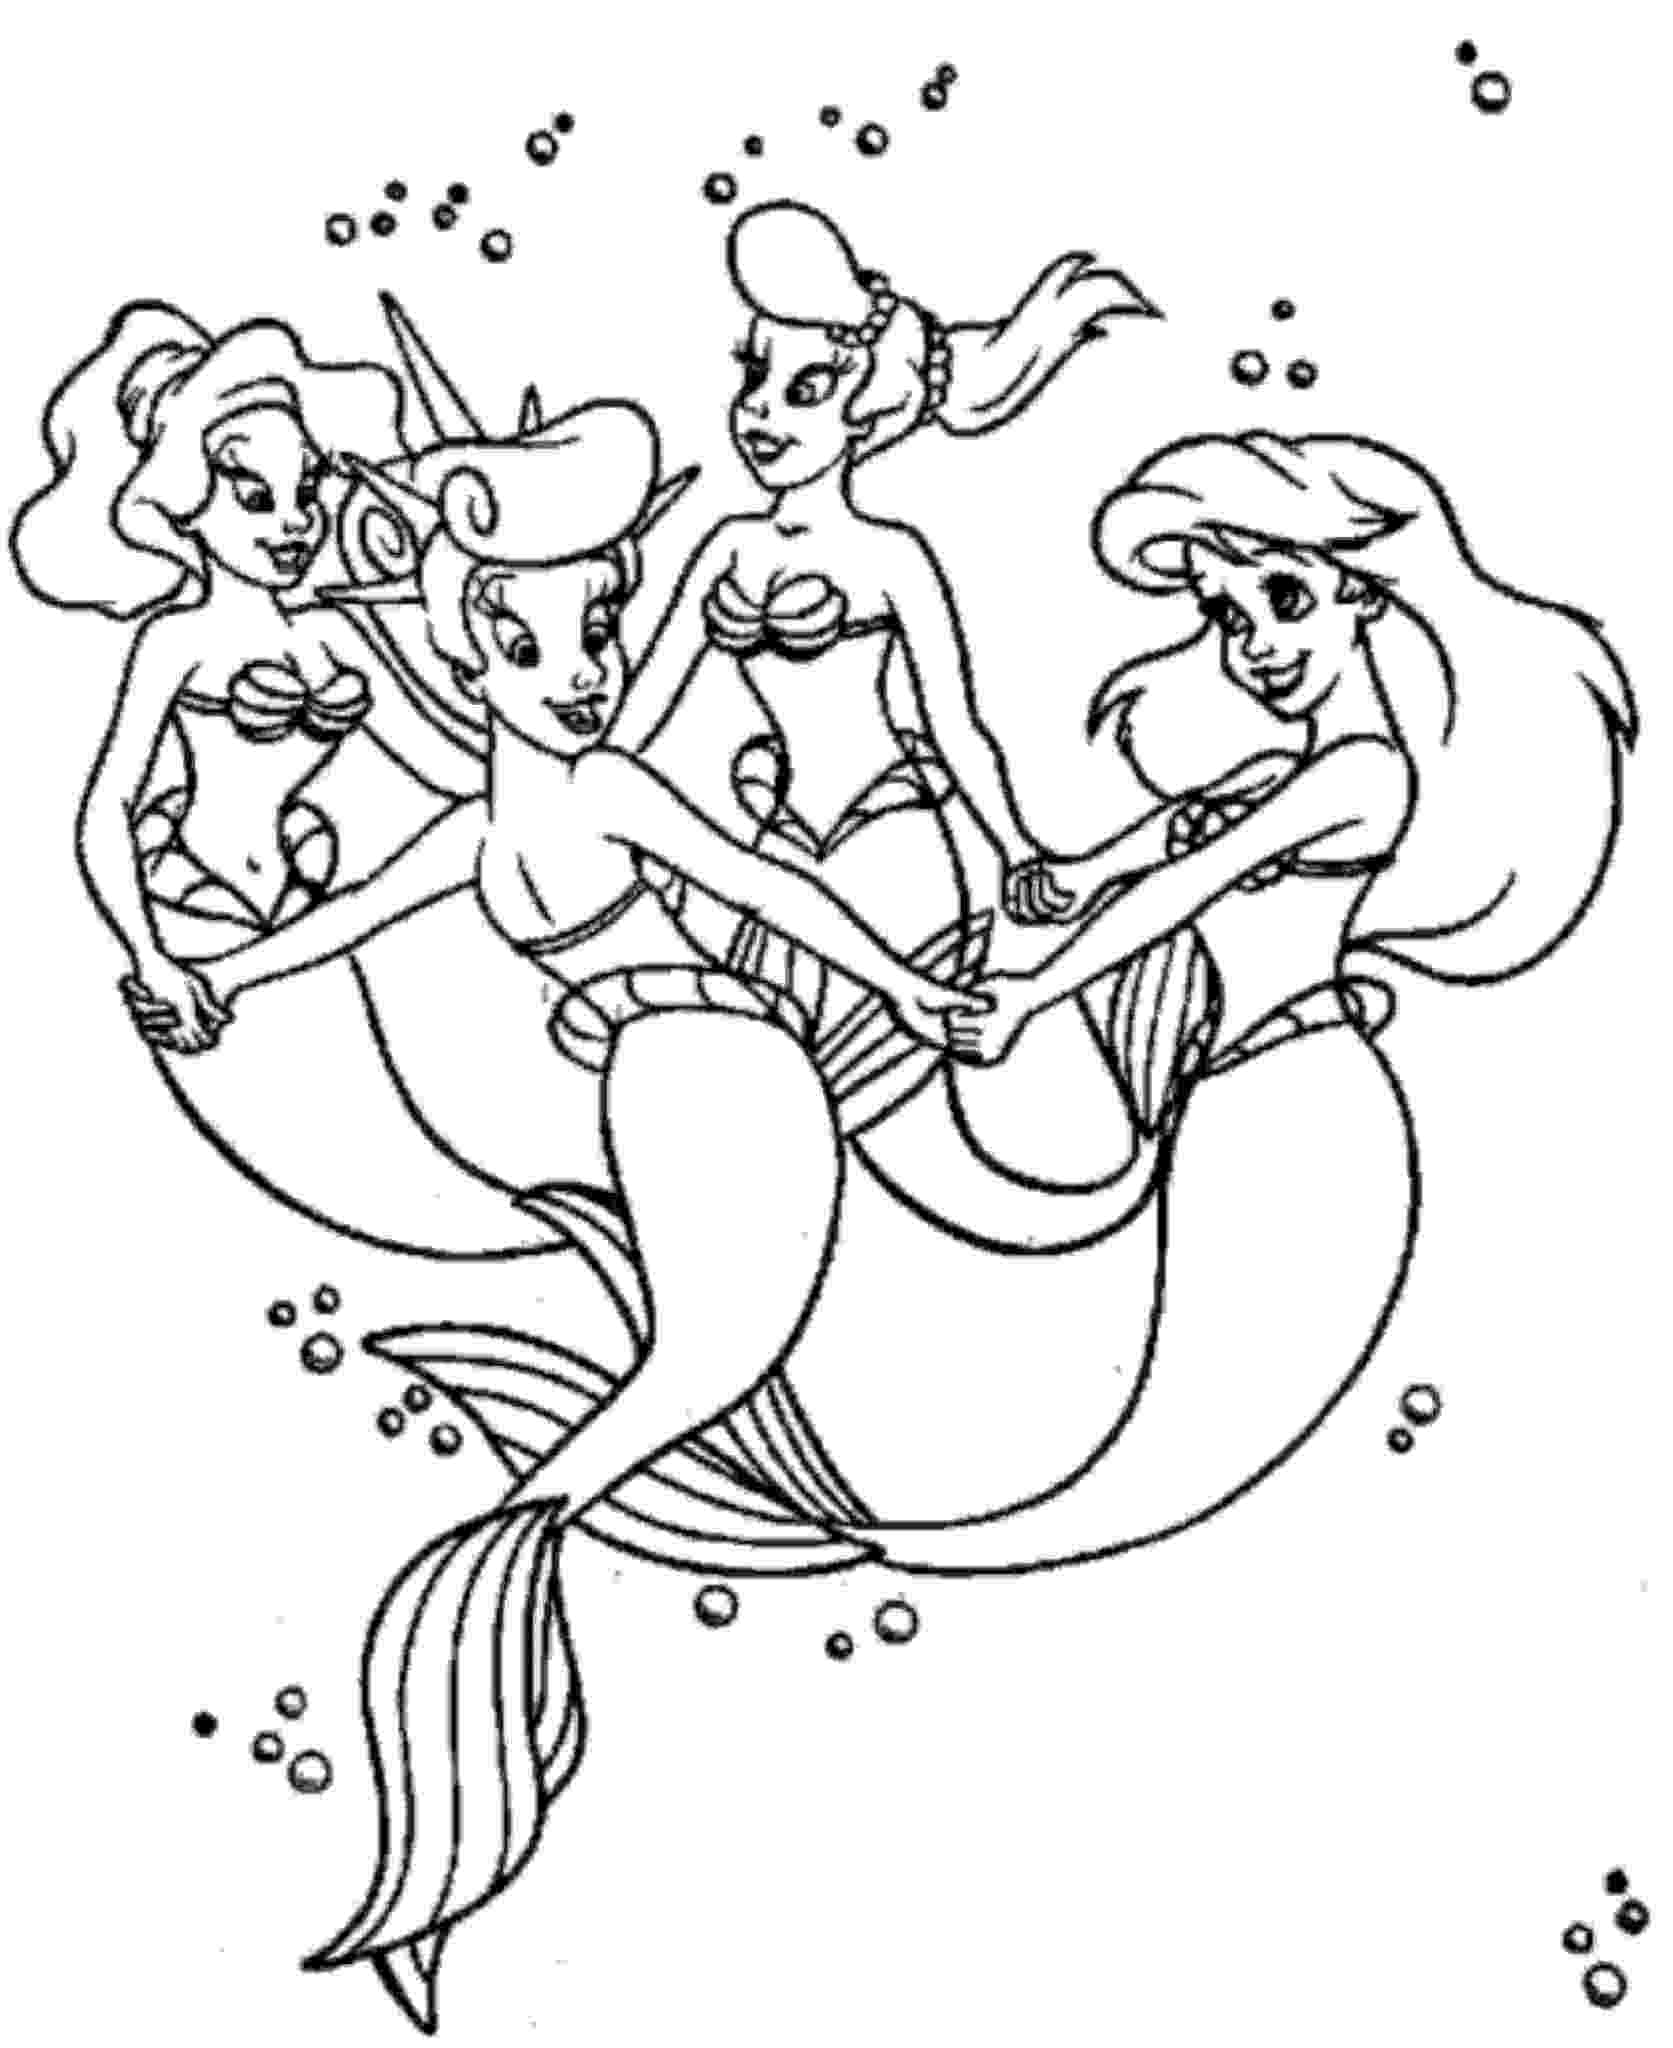 ariel the little mermaid coloring pages print download find the suitable little mermaid mermaid pages ariel coloring little the 